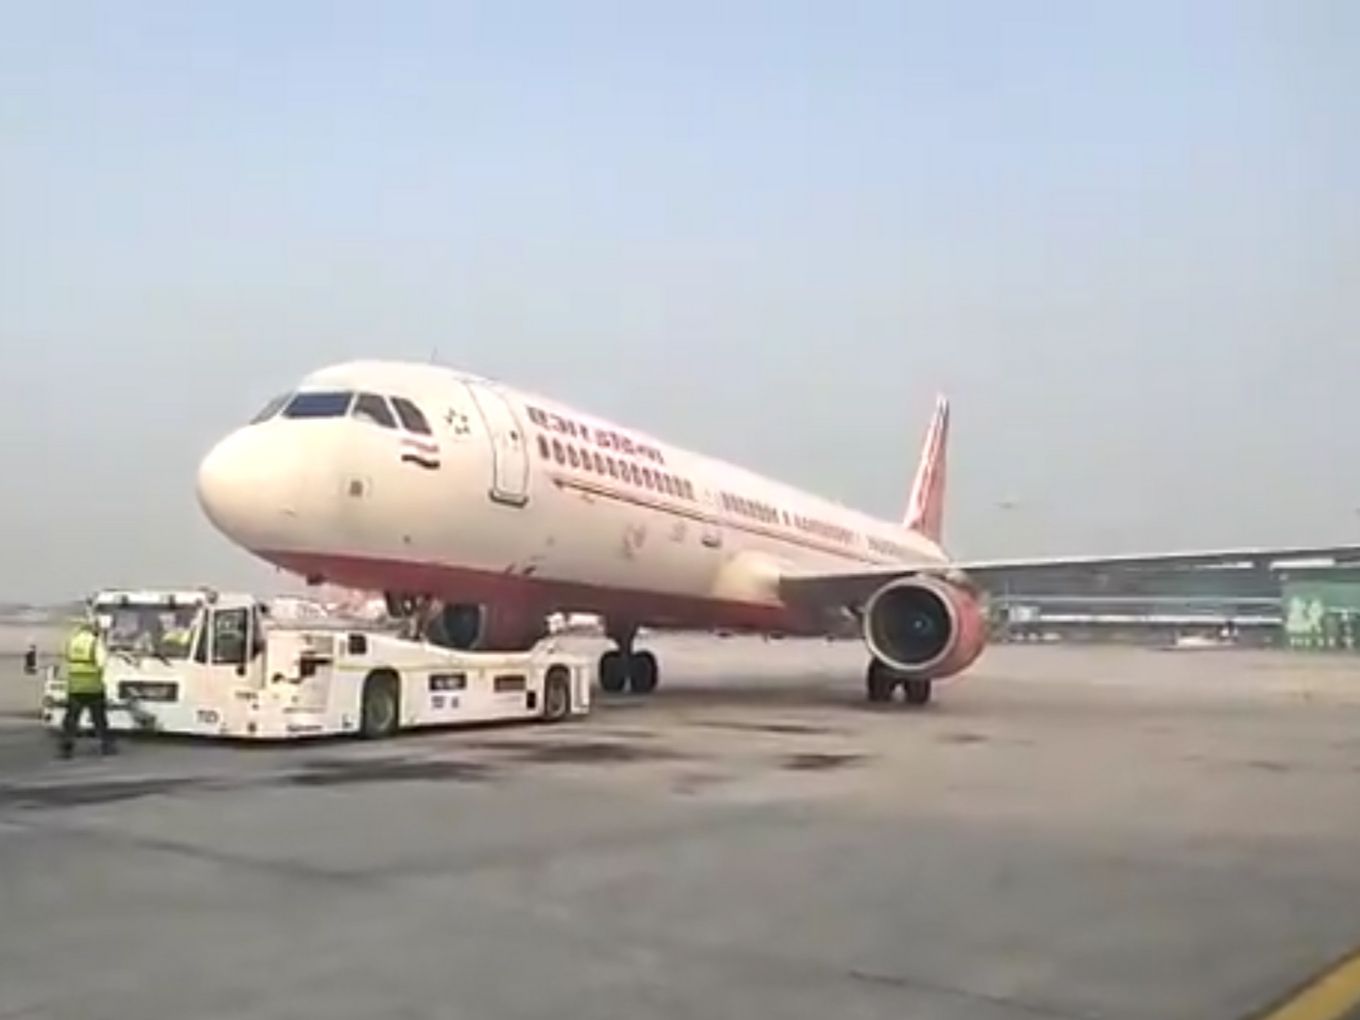 Air India Makes History With World’s First Use Of Taxibot